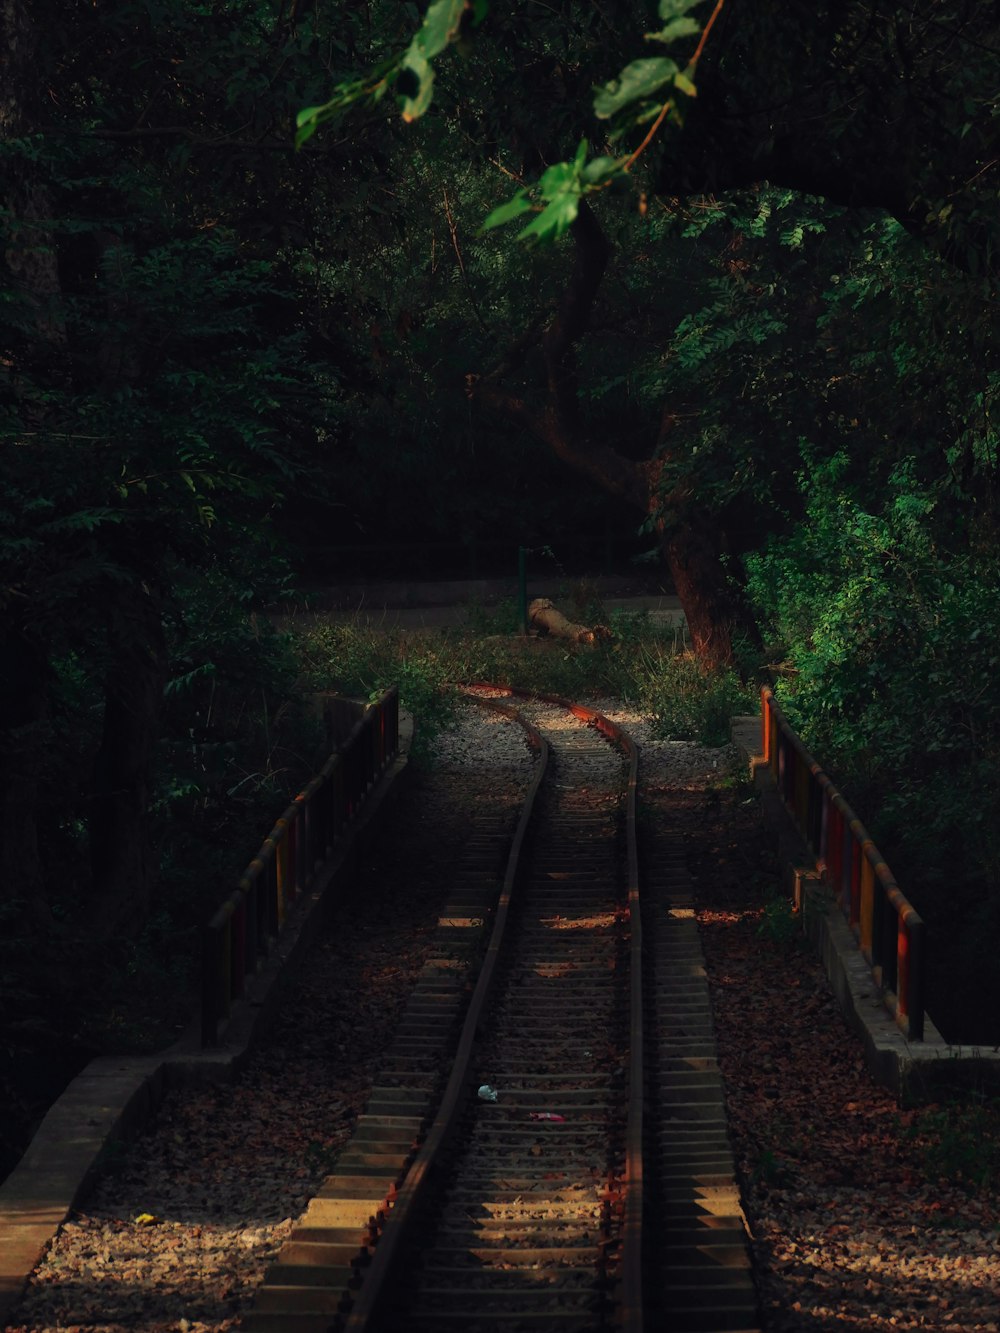 brown train rail surrounded by green trees